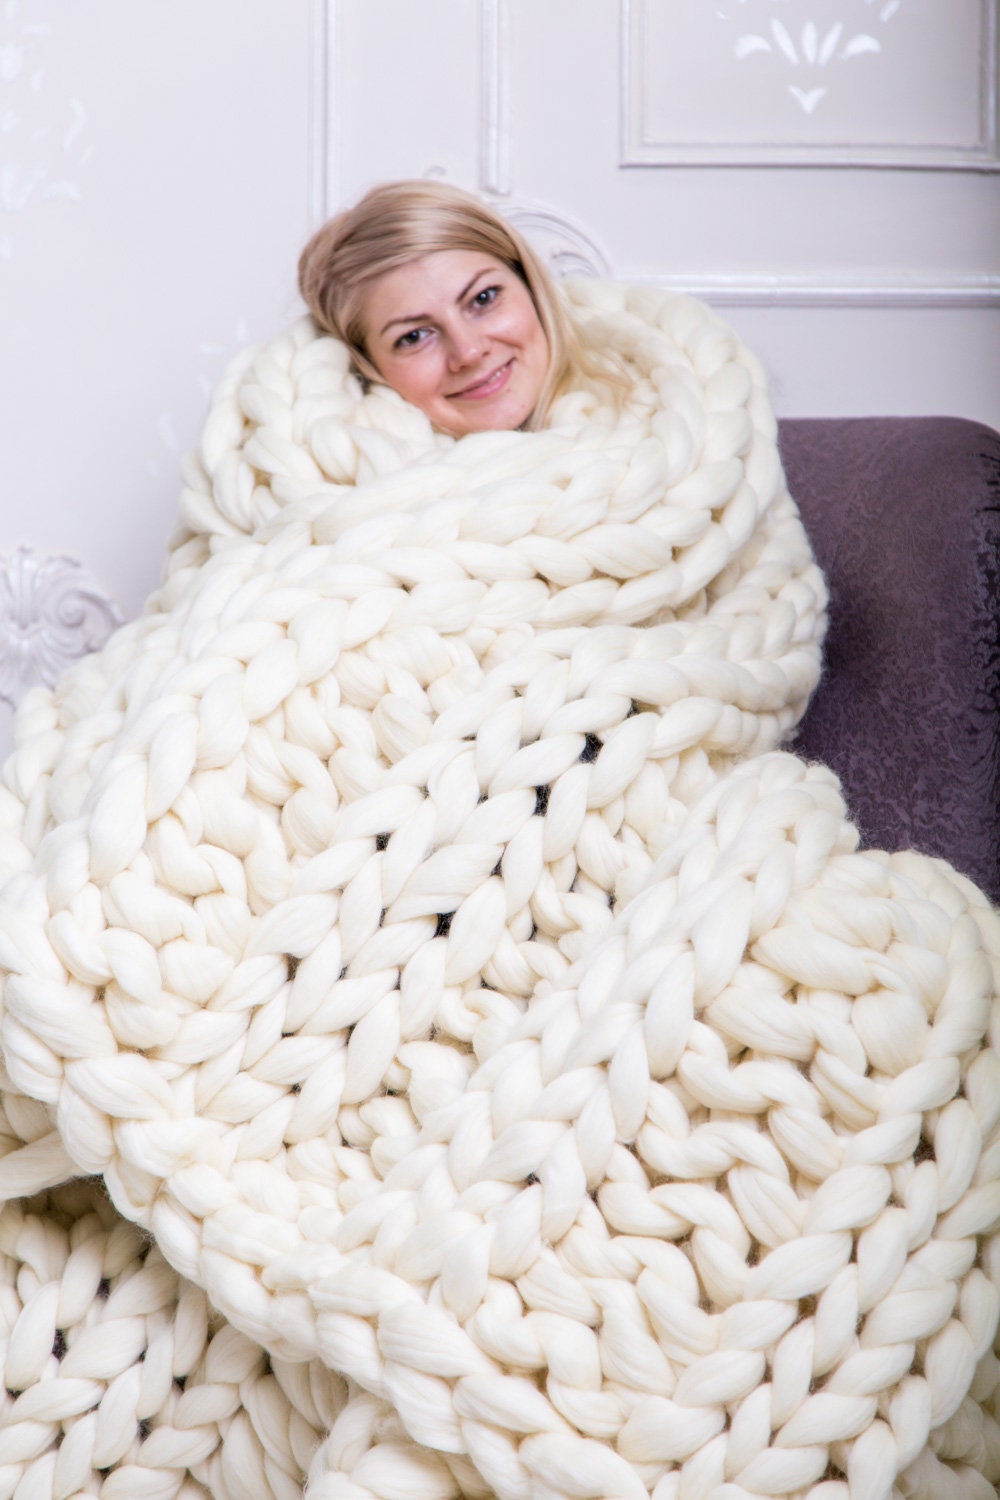 Product Review: Say “No” to the Super Chunky Arm Knitting Blanket